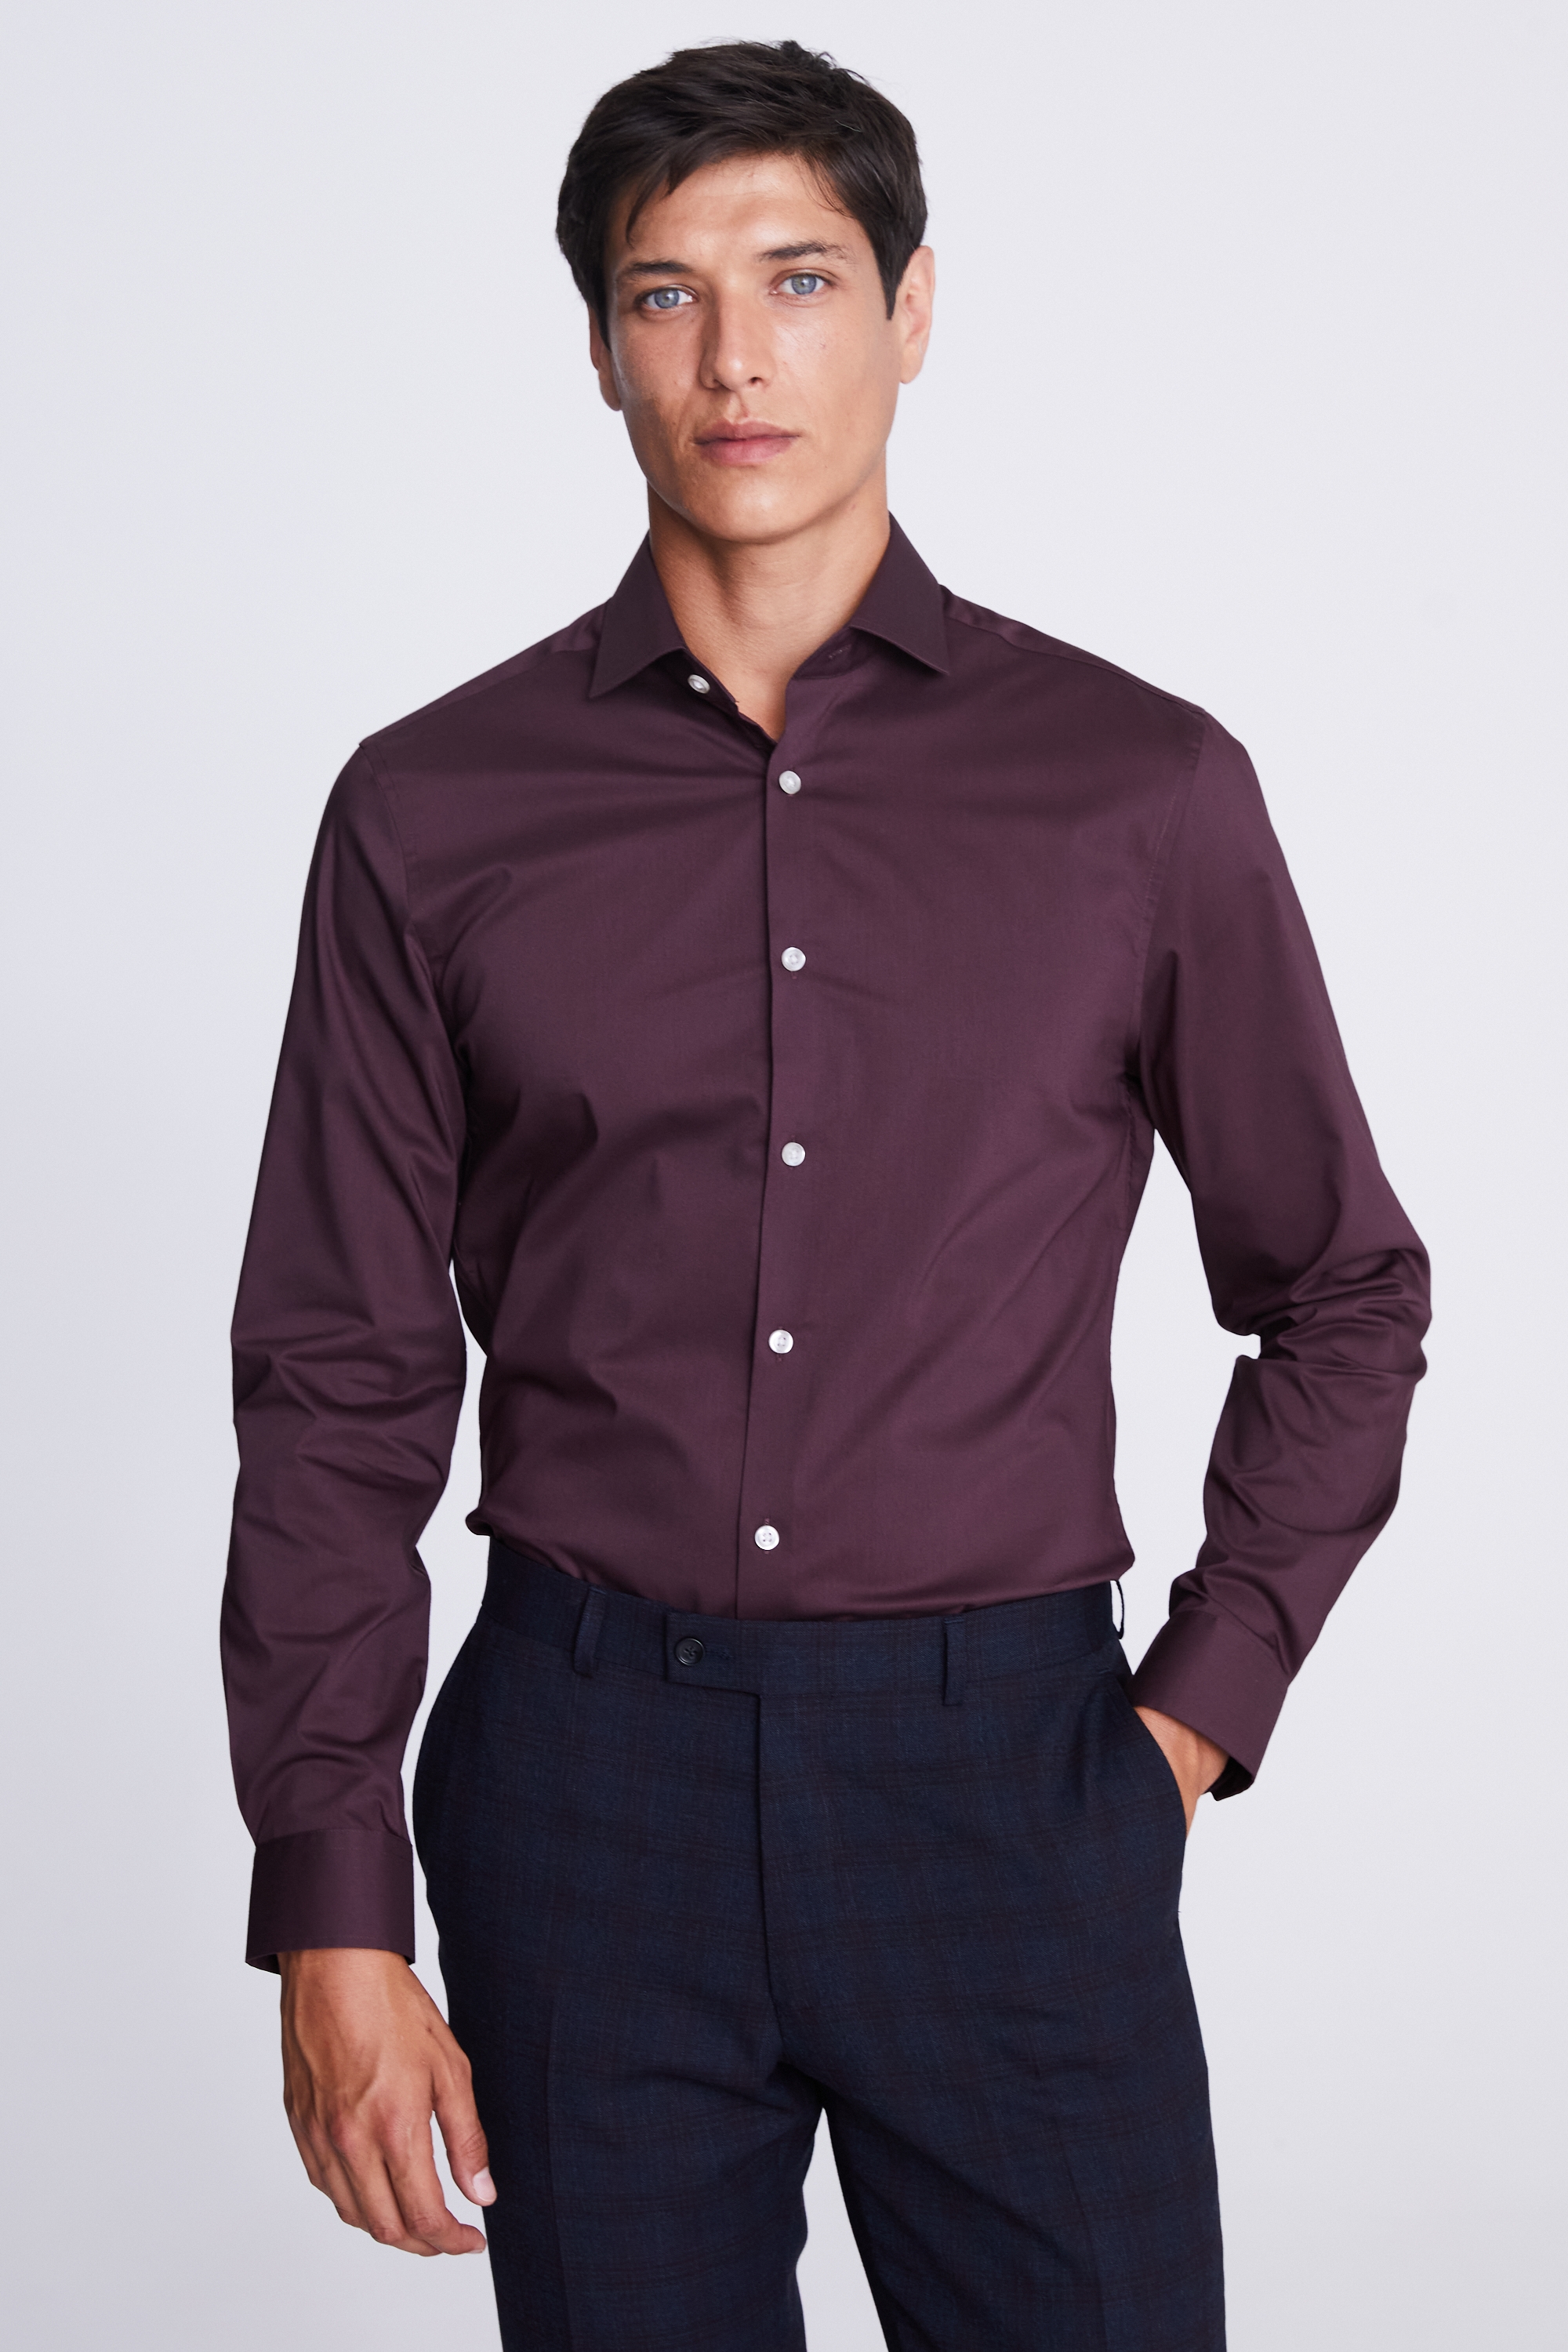 Slim Fit Wine Stretch Shirt | Buy Online at Moss